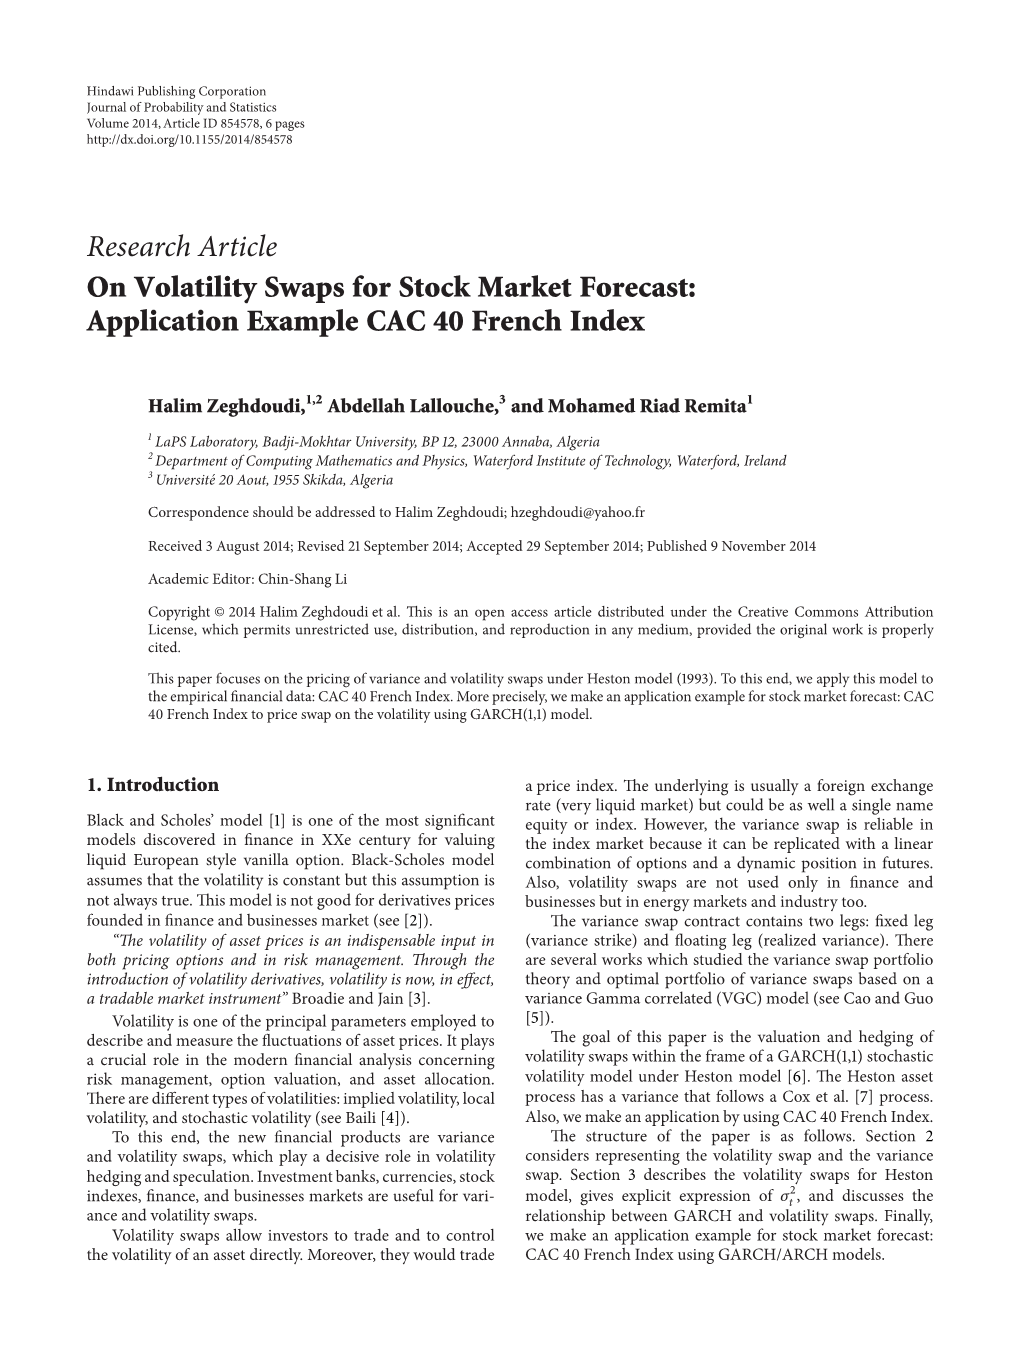 On Volatility Swaps for Stock Market Forecast: Application Example CAC 40 French Index